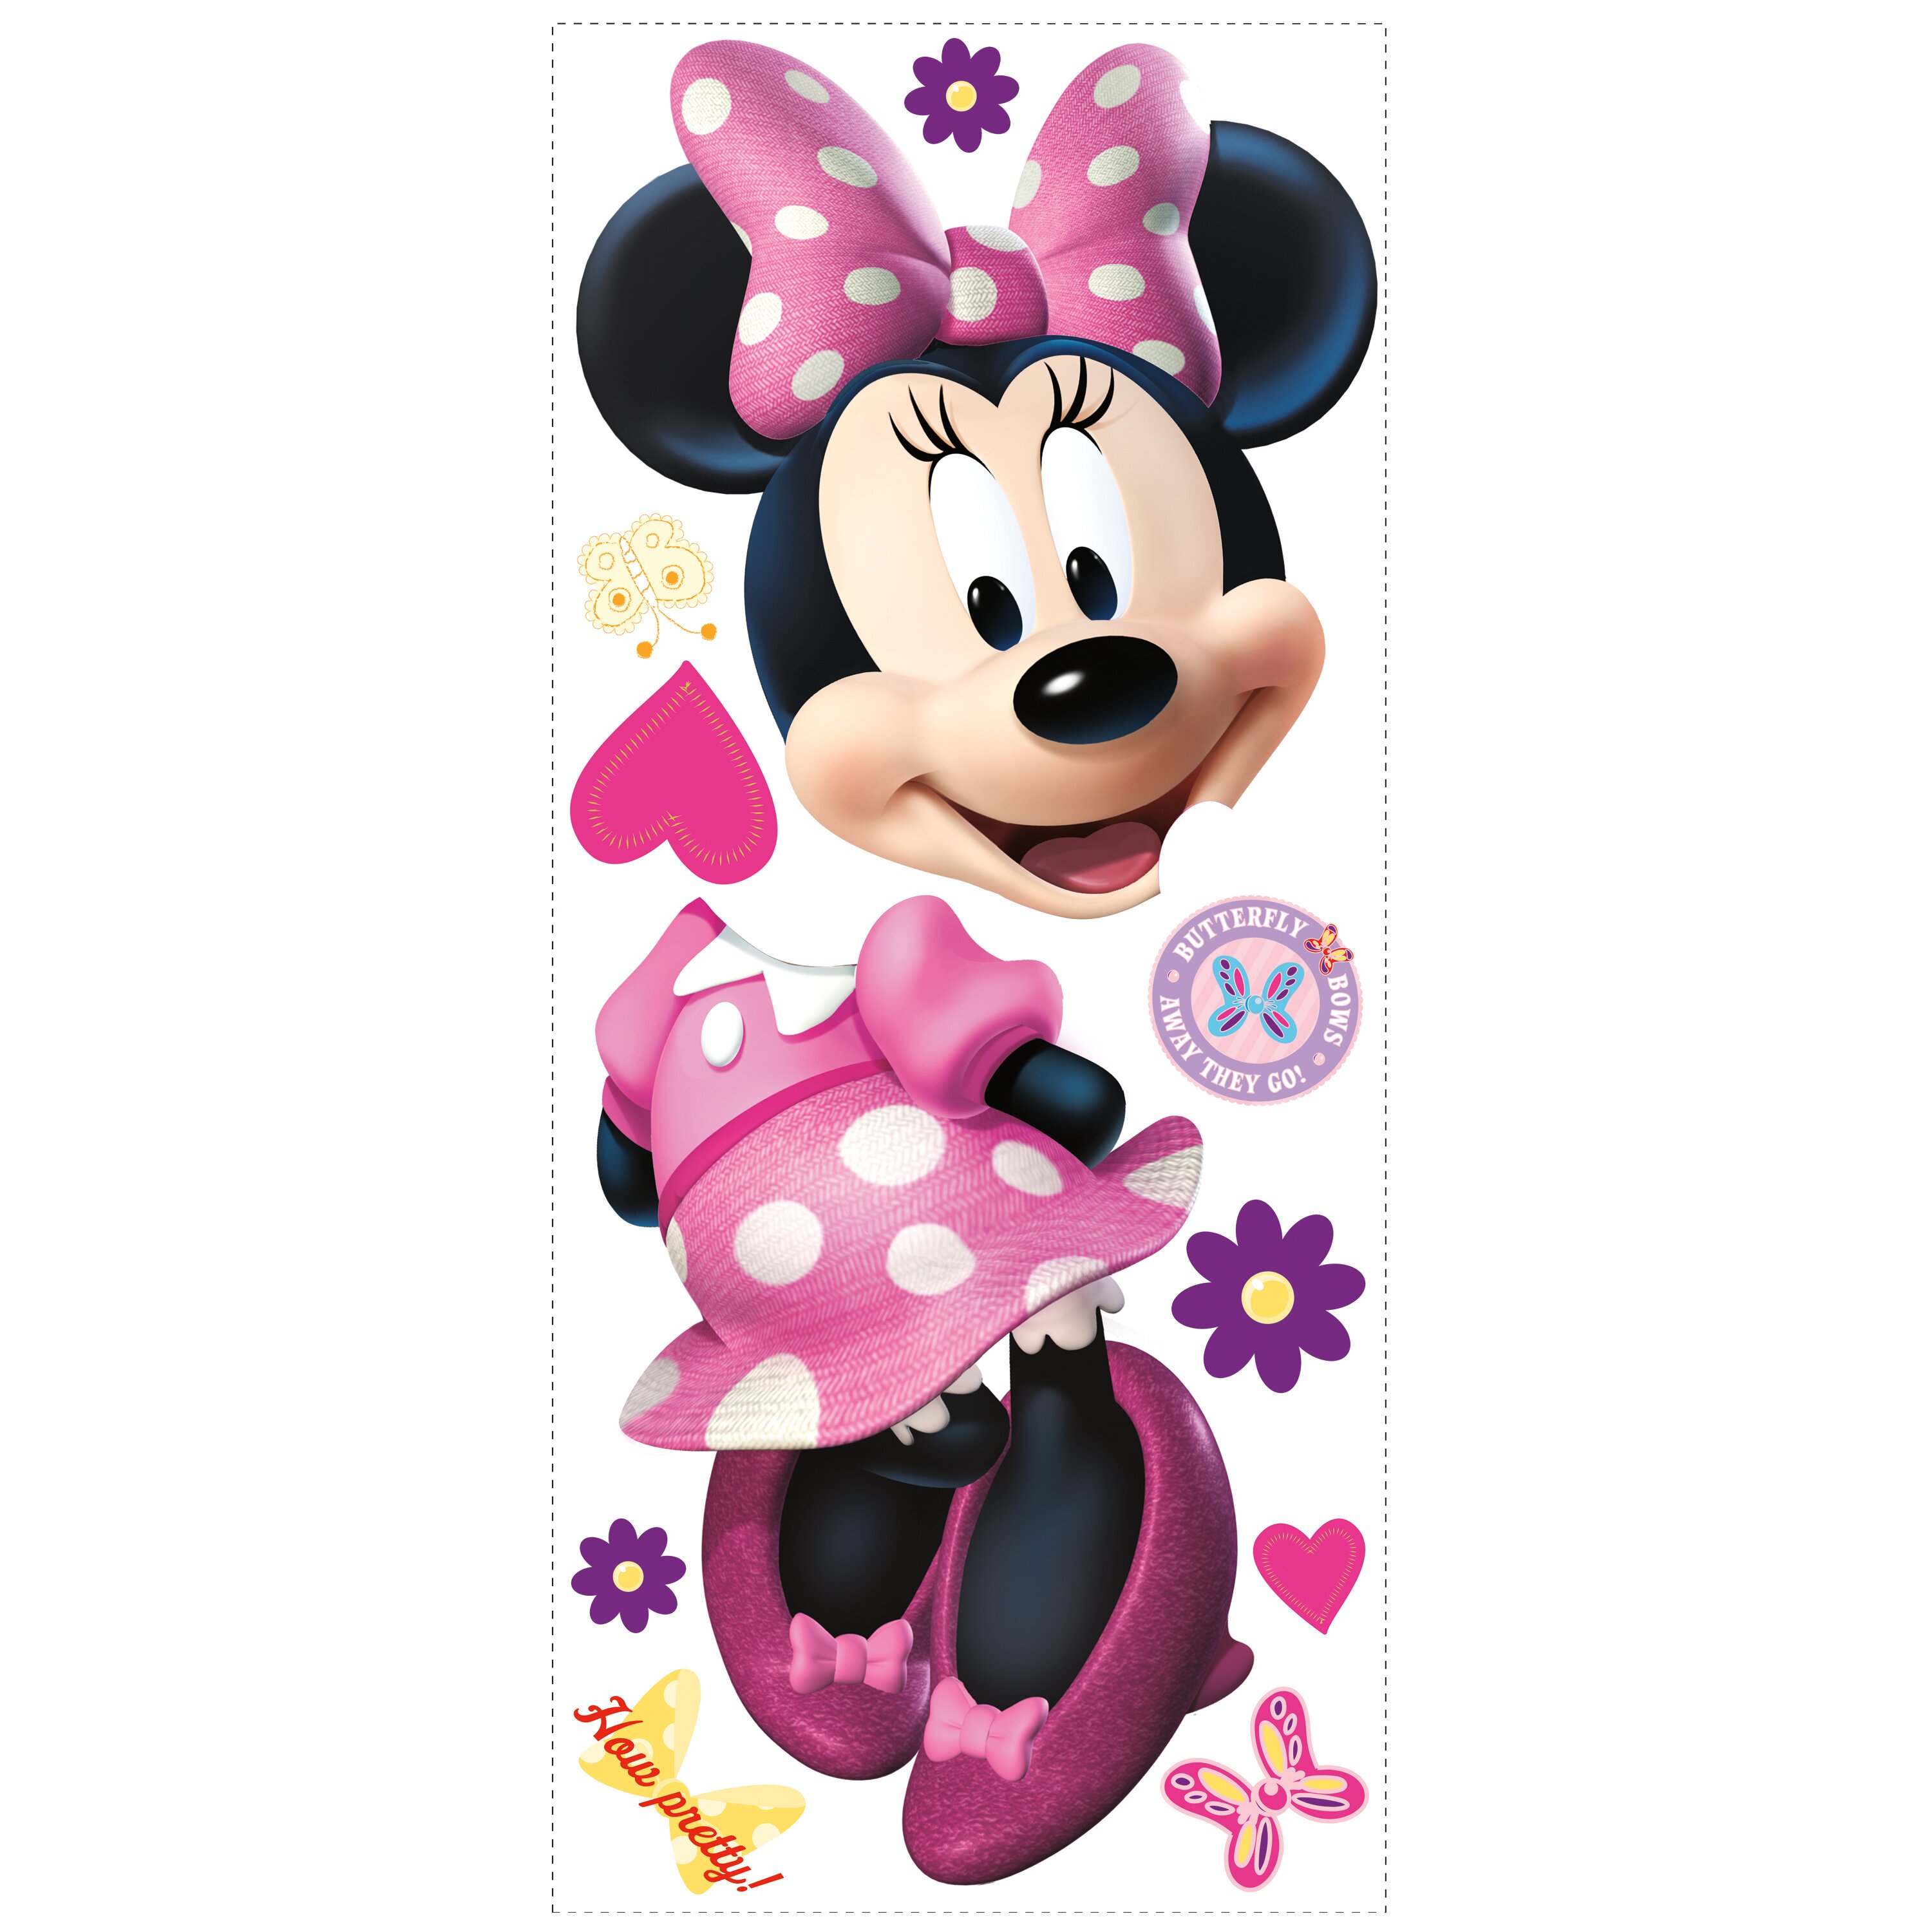 room-mates-popular-characters-mickey-and-friends-minnie-bowtique-giant-wall-decal-reviews